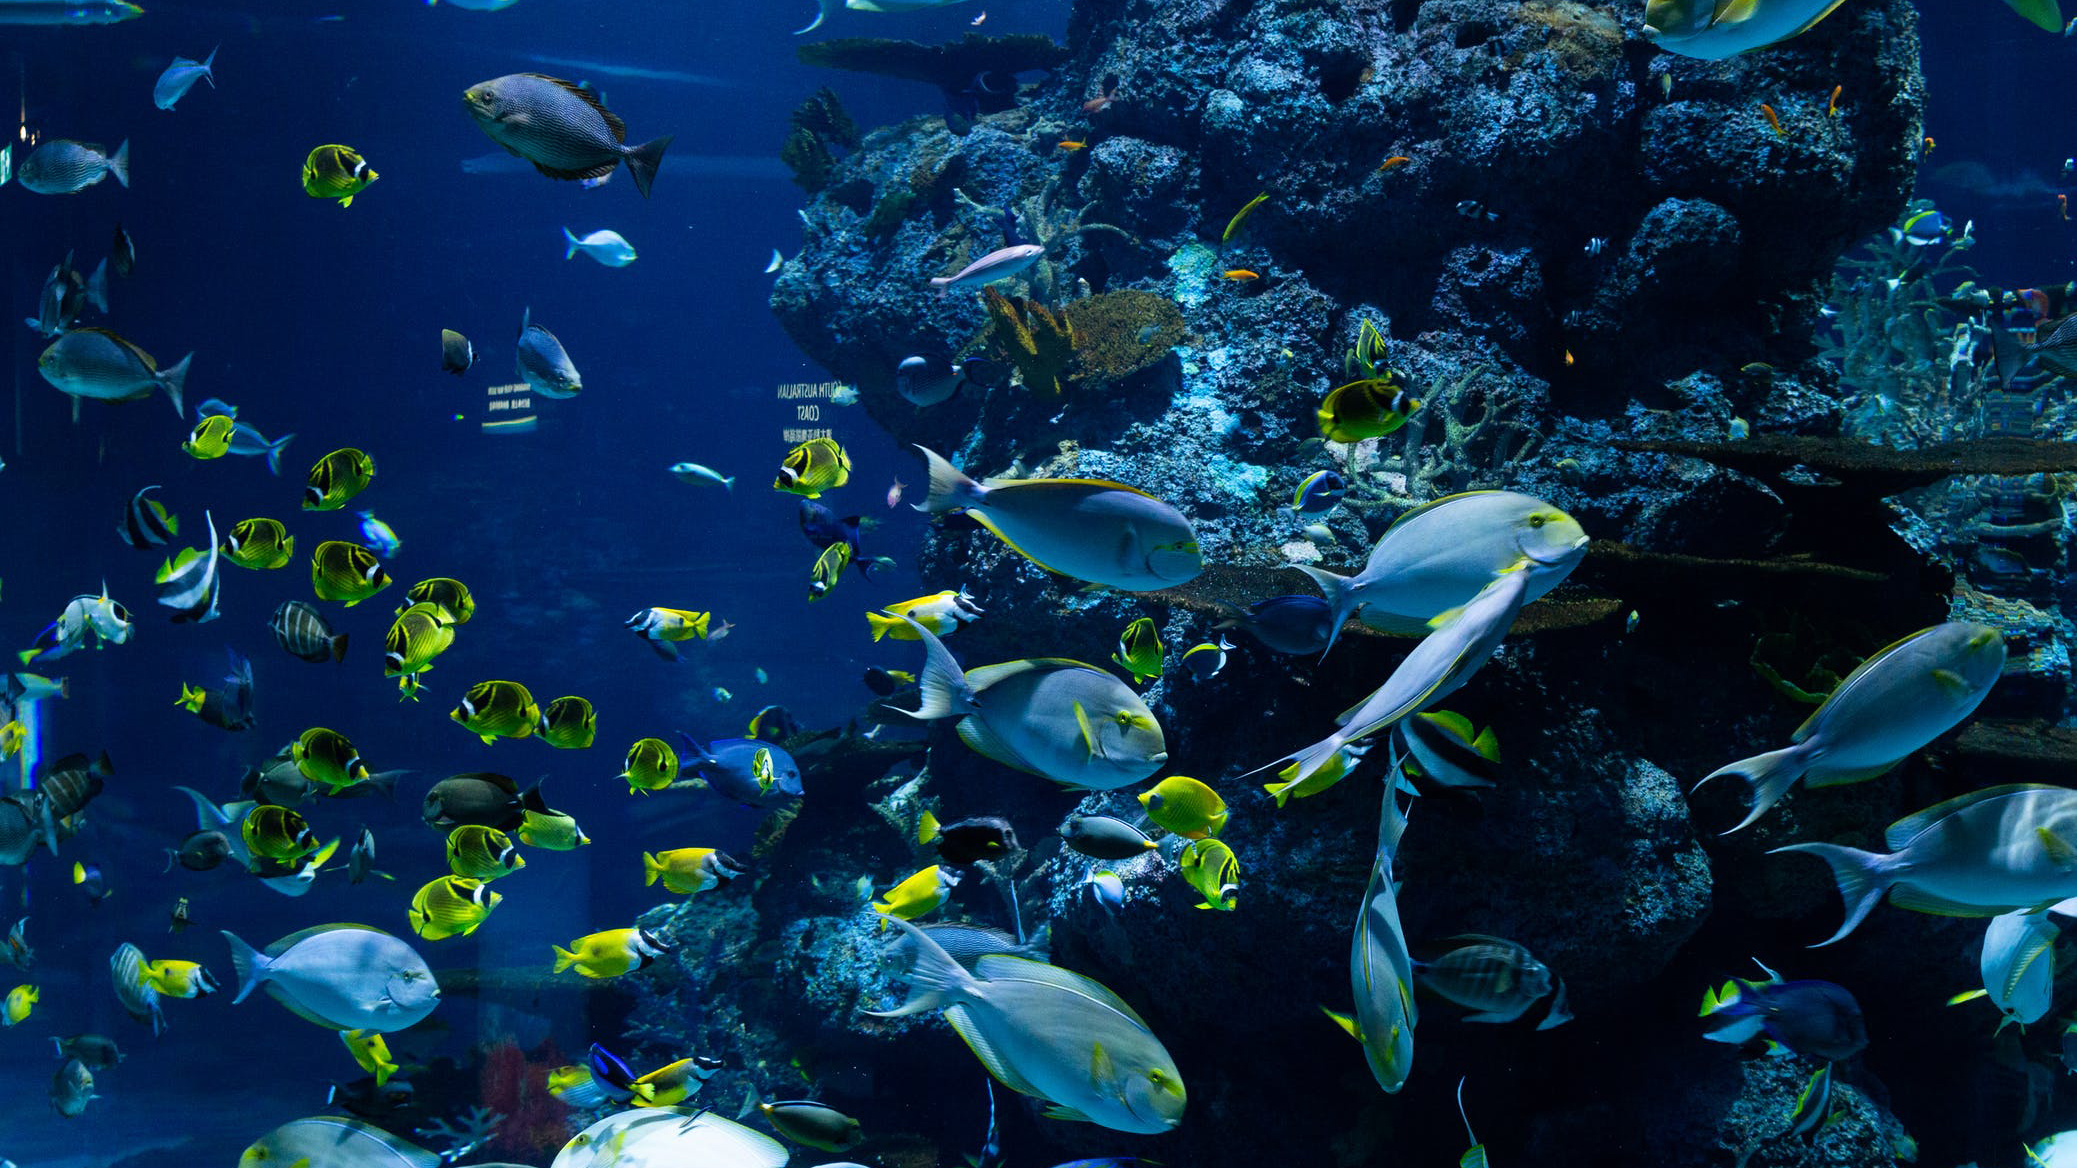 Fish swimming in the deep blue ocean showing an ecosystem